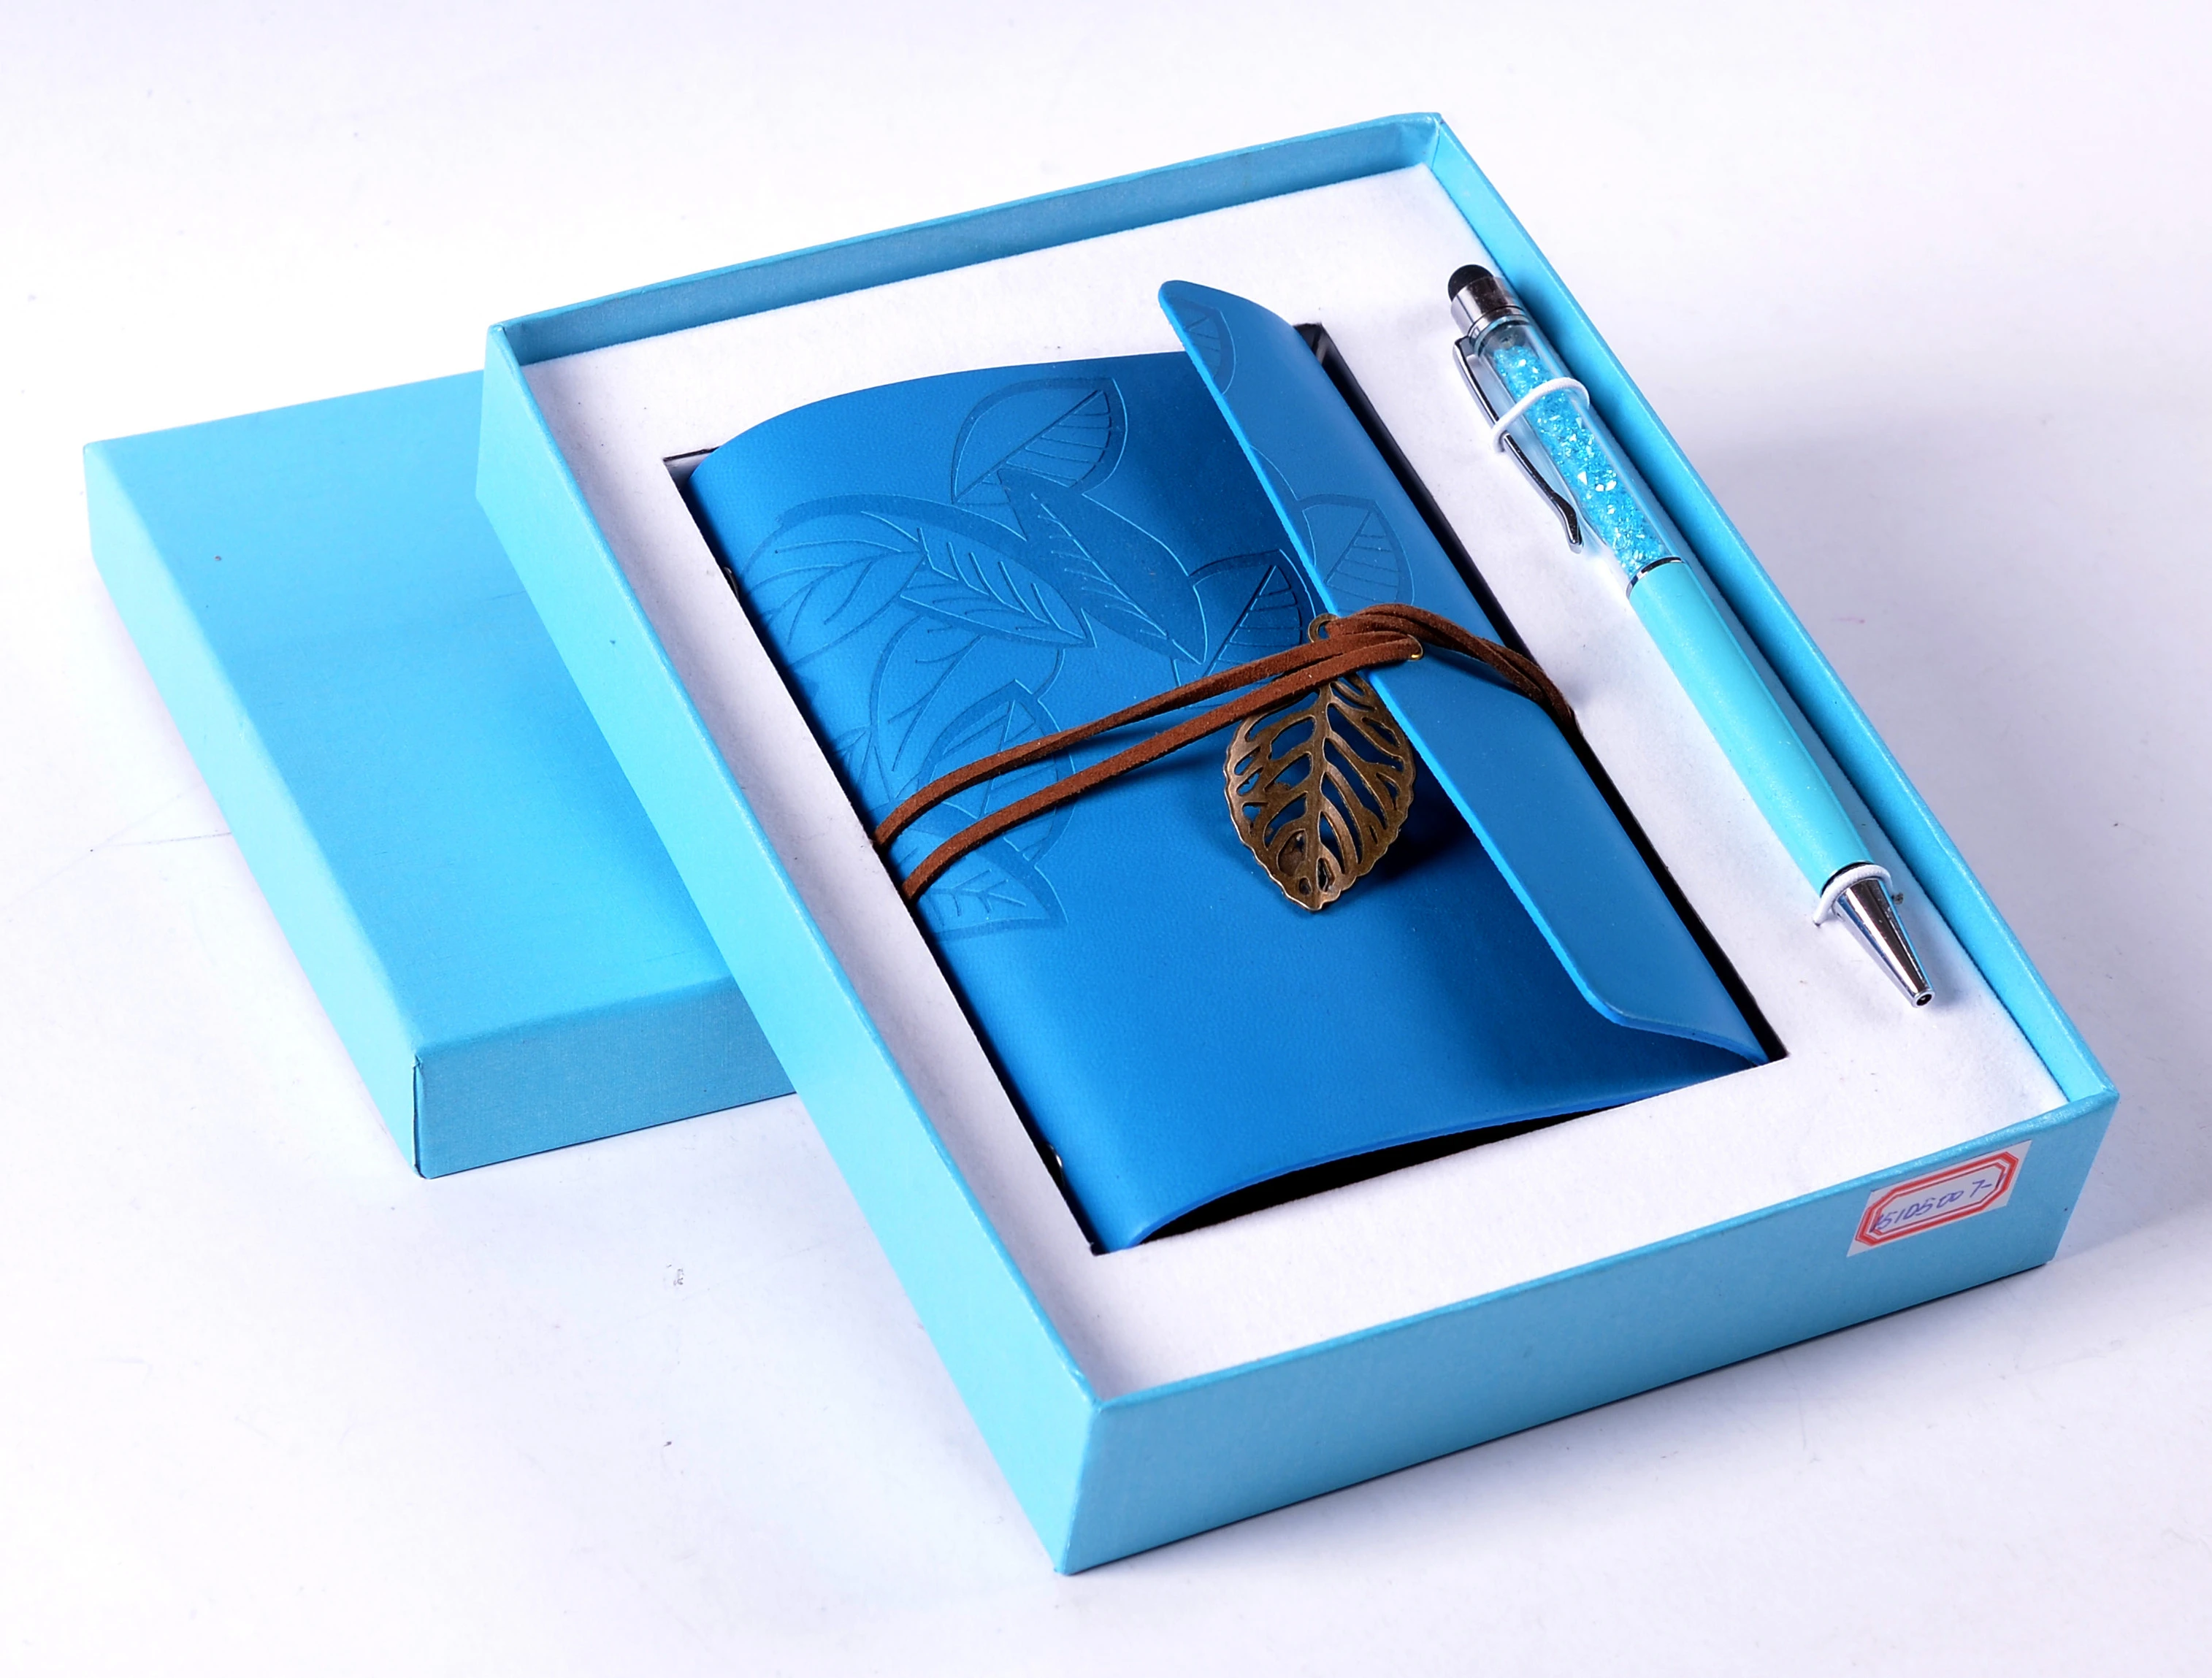 2021 Simple Promotional Custom Leather Notebook And Pen Office Stationery Gift Set In Box